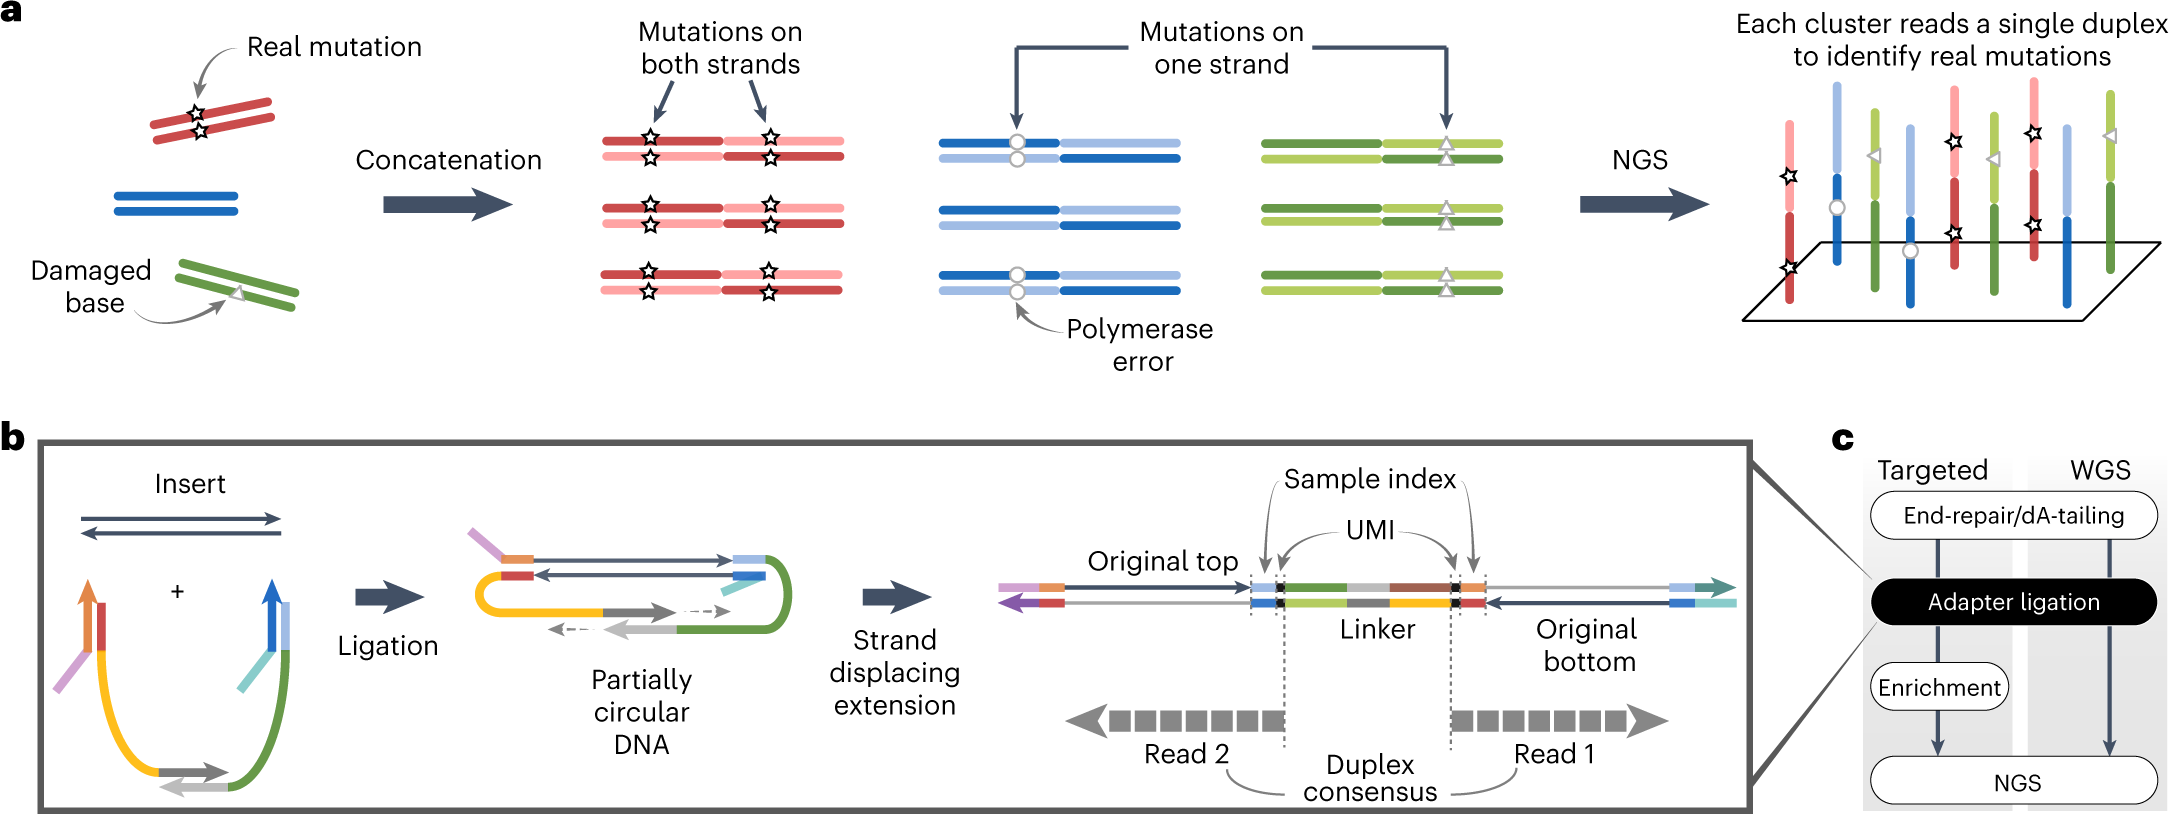 Single duplex DNA sequencing with CODEC detects mutations with